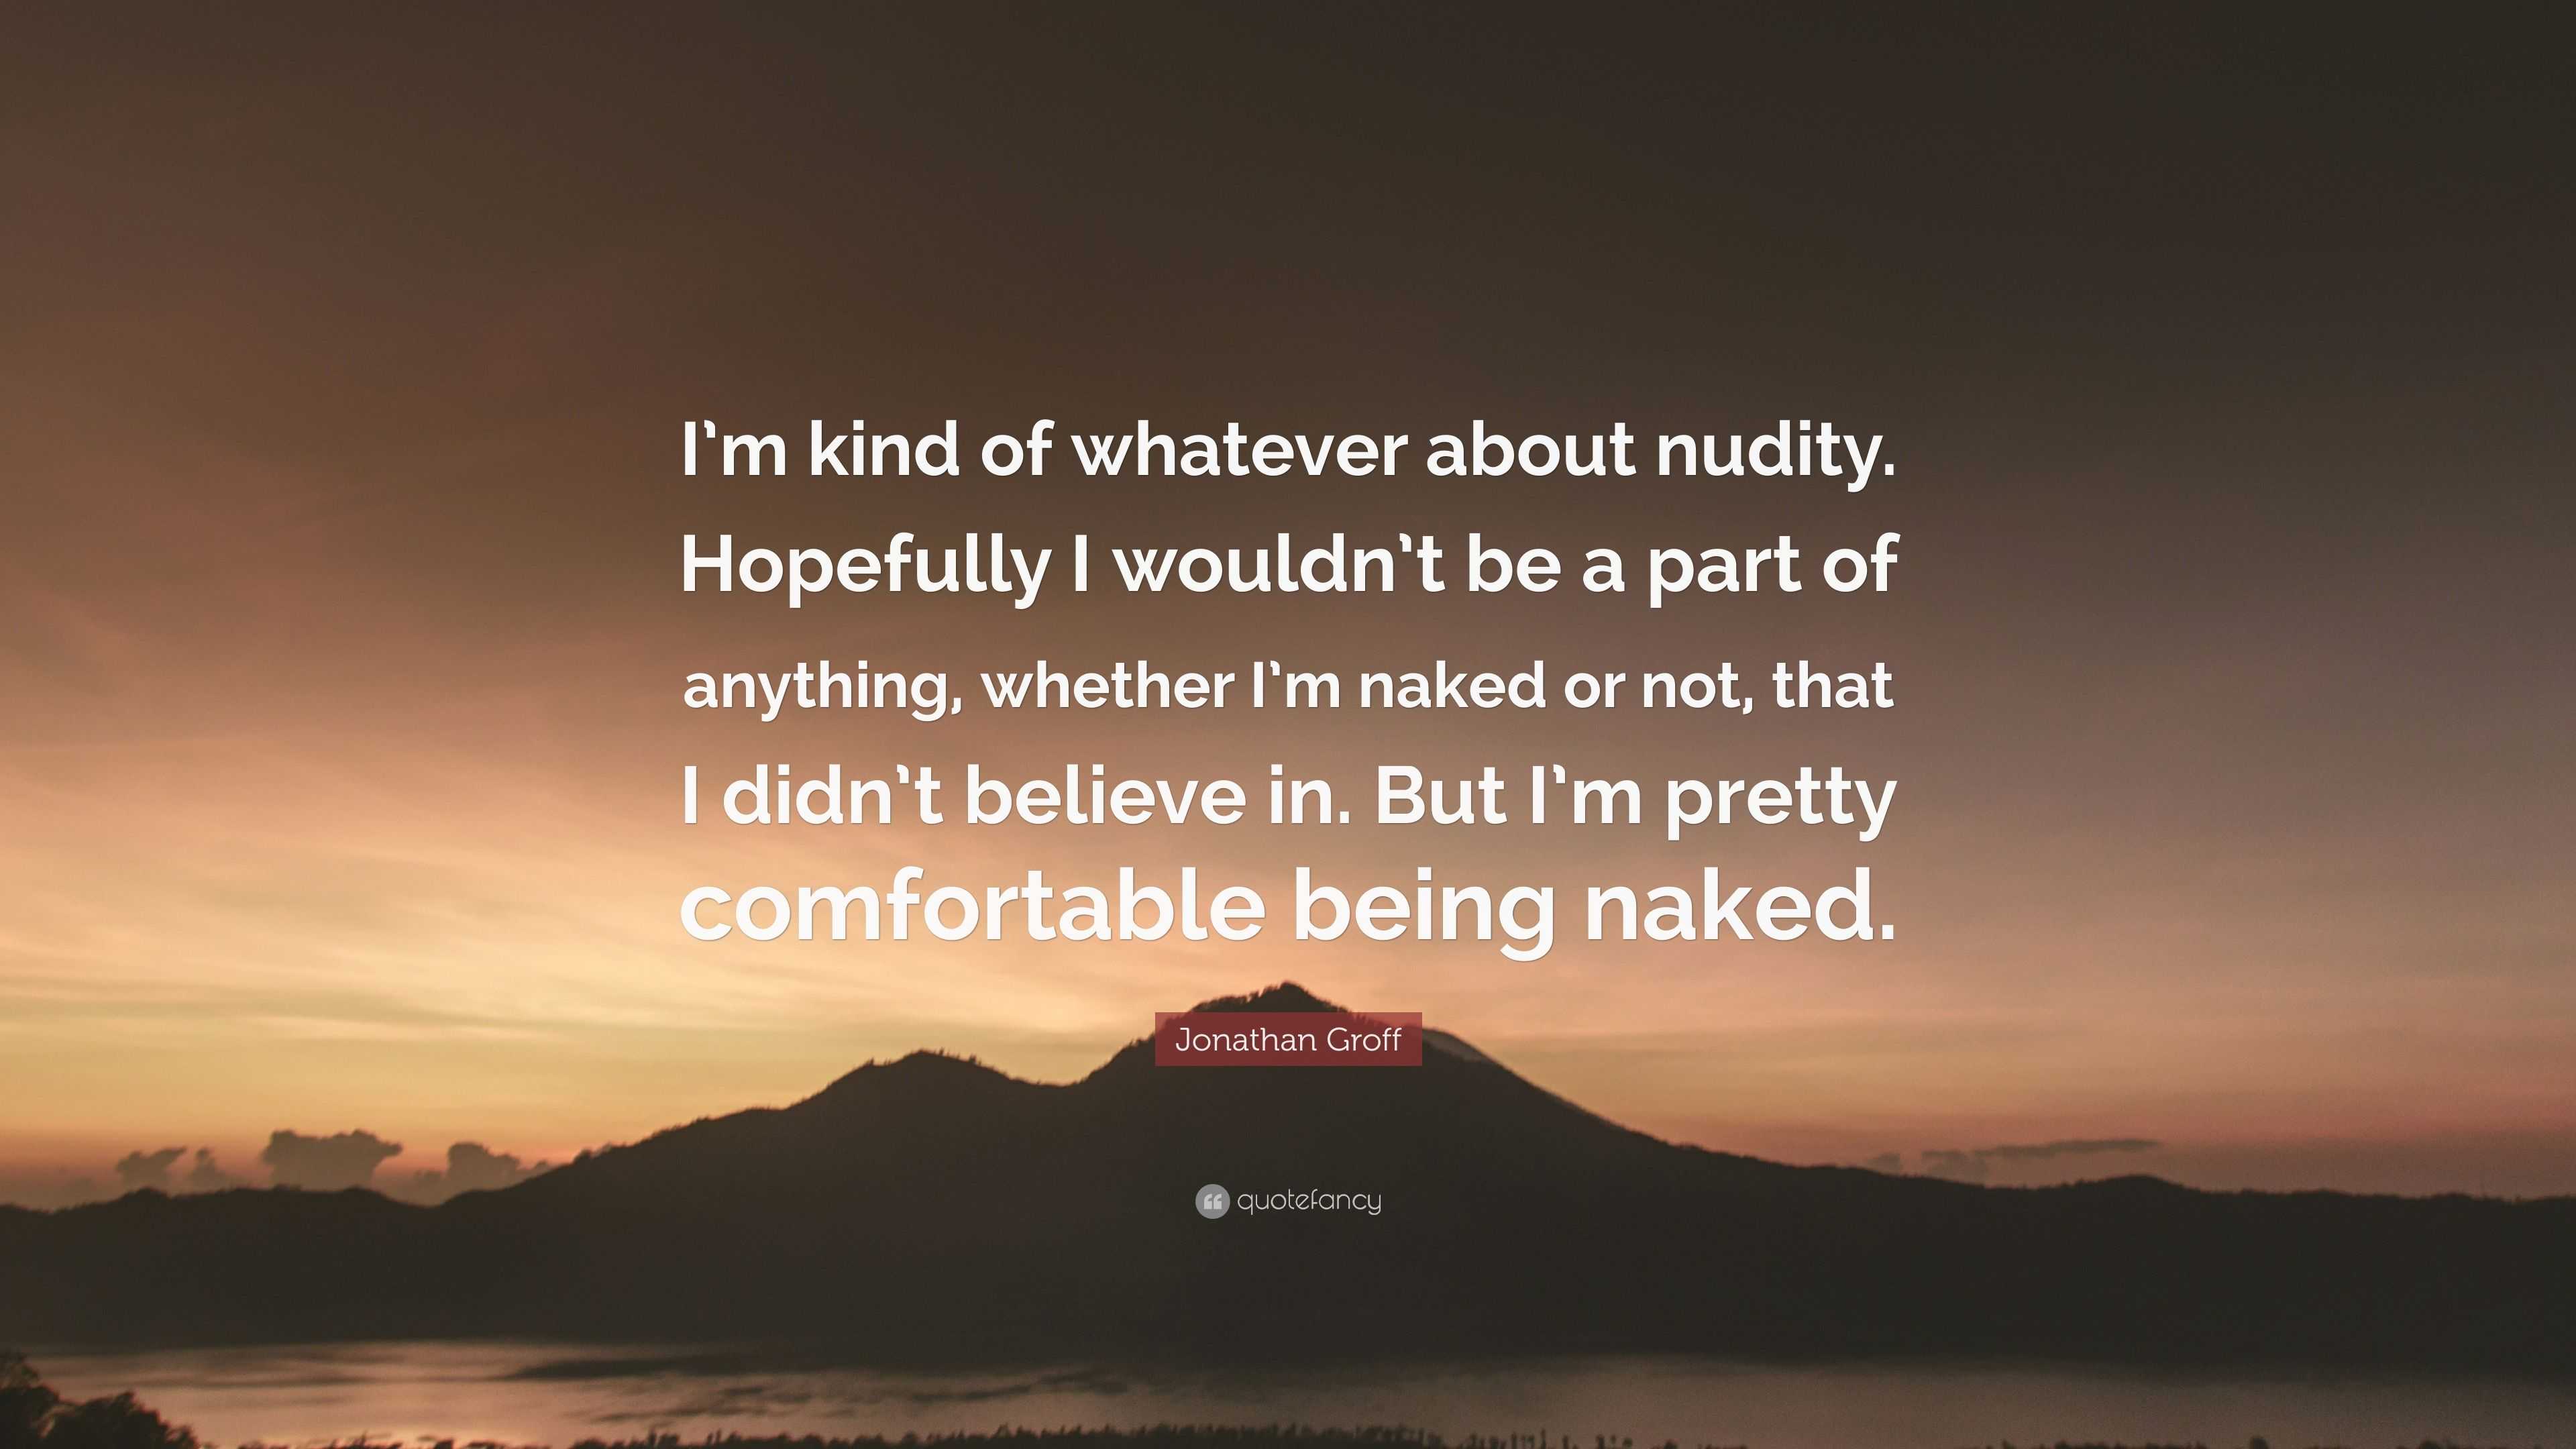 Jonathan Groff Quote: “I'm kind of whatever about nudity ...